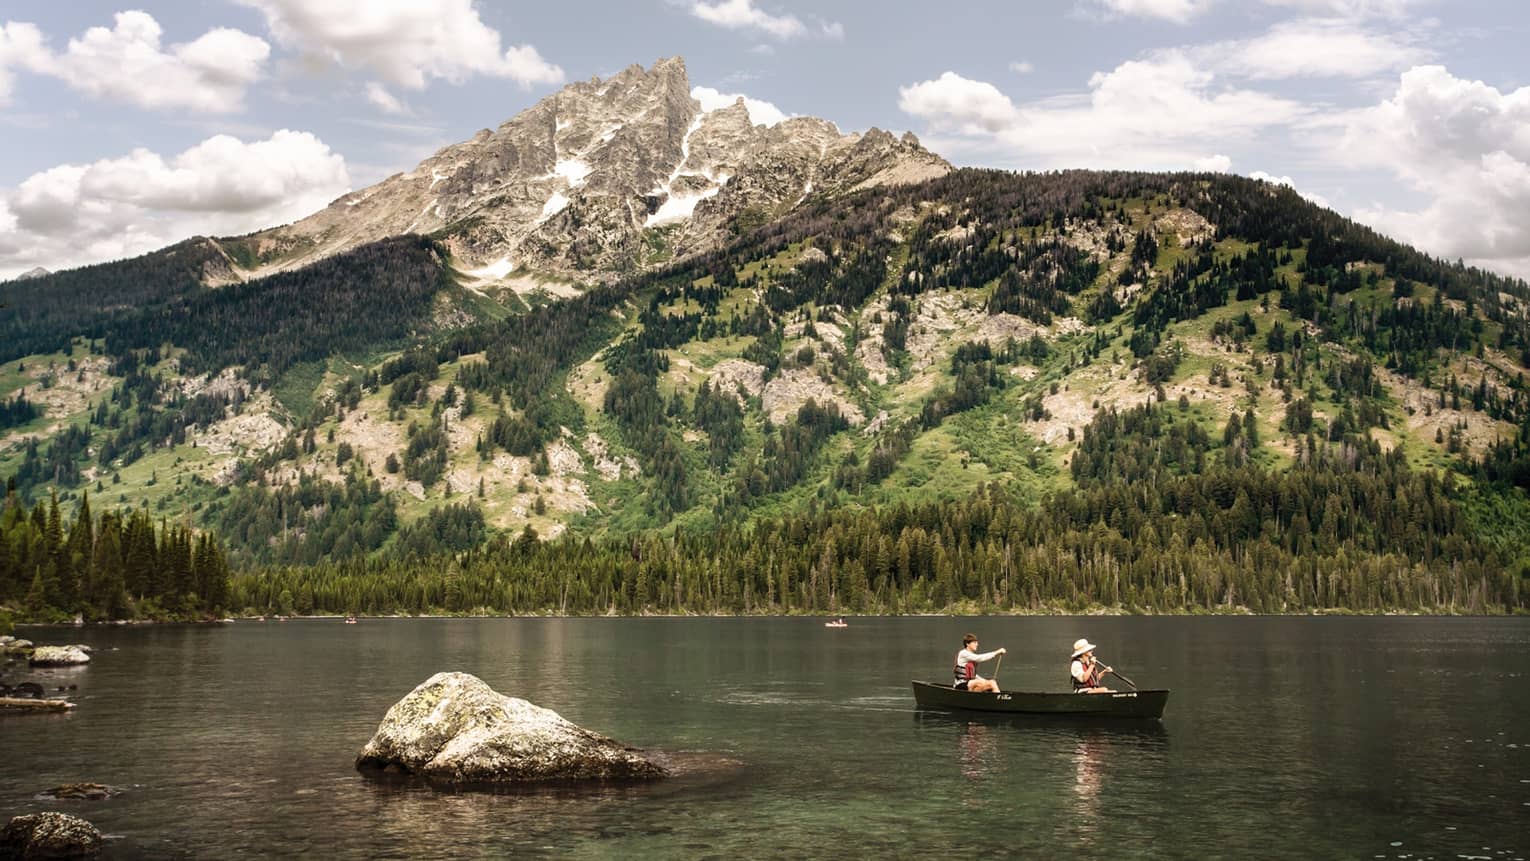 Two people in canoe on lake below towering mountains on sunny day